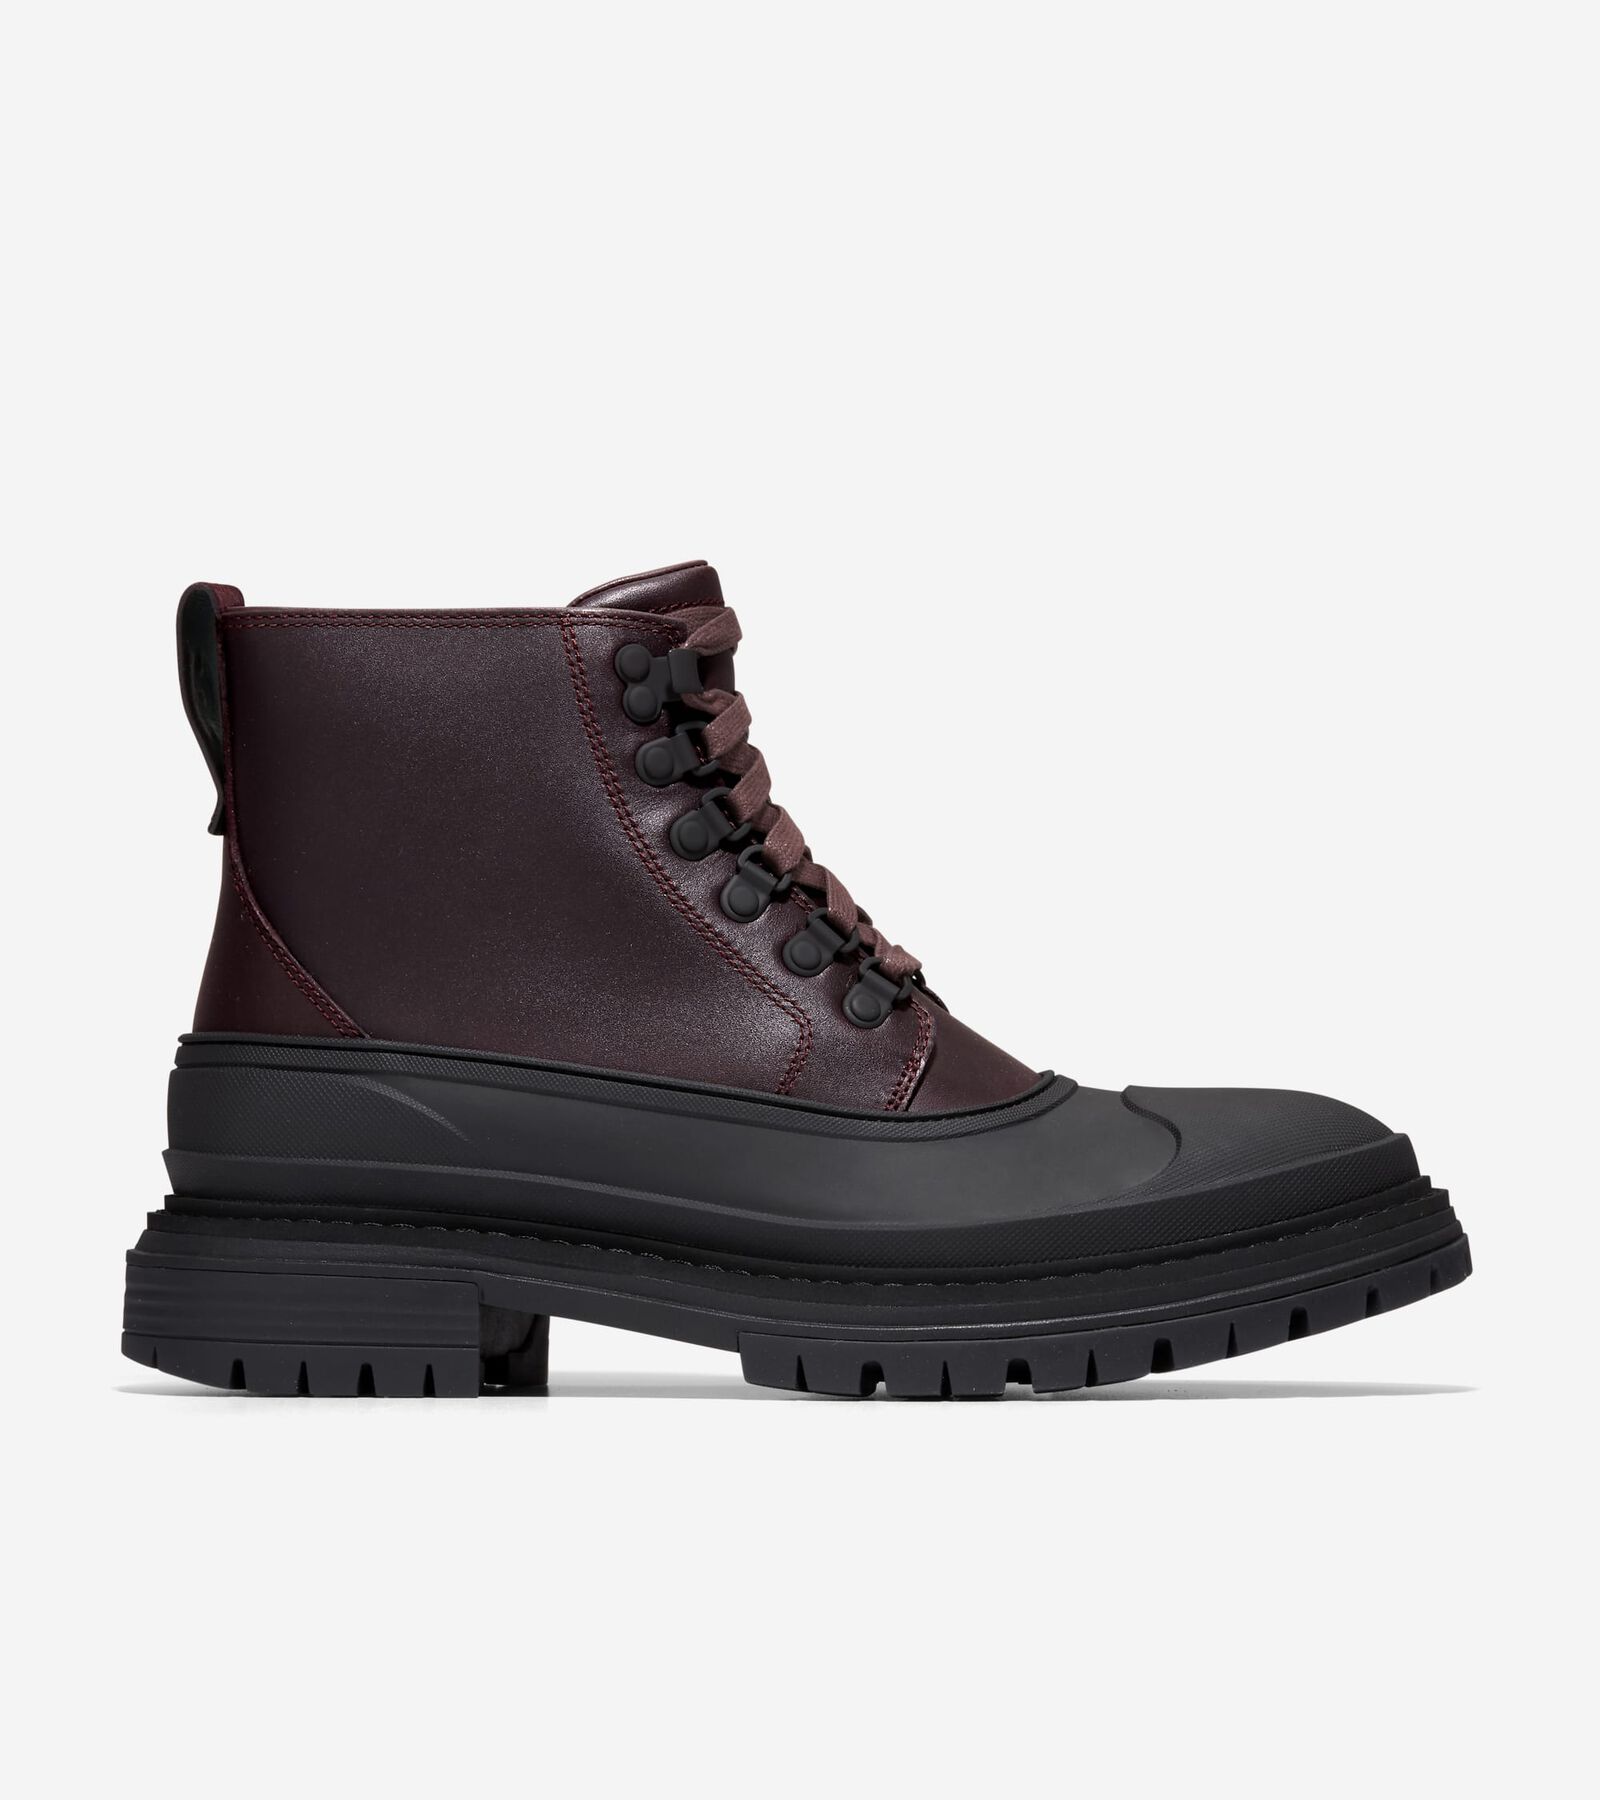 COLE HAAN COLE HAAN STRATTON SHROUD BOOT